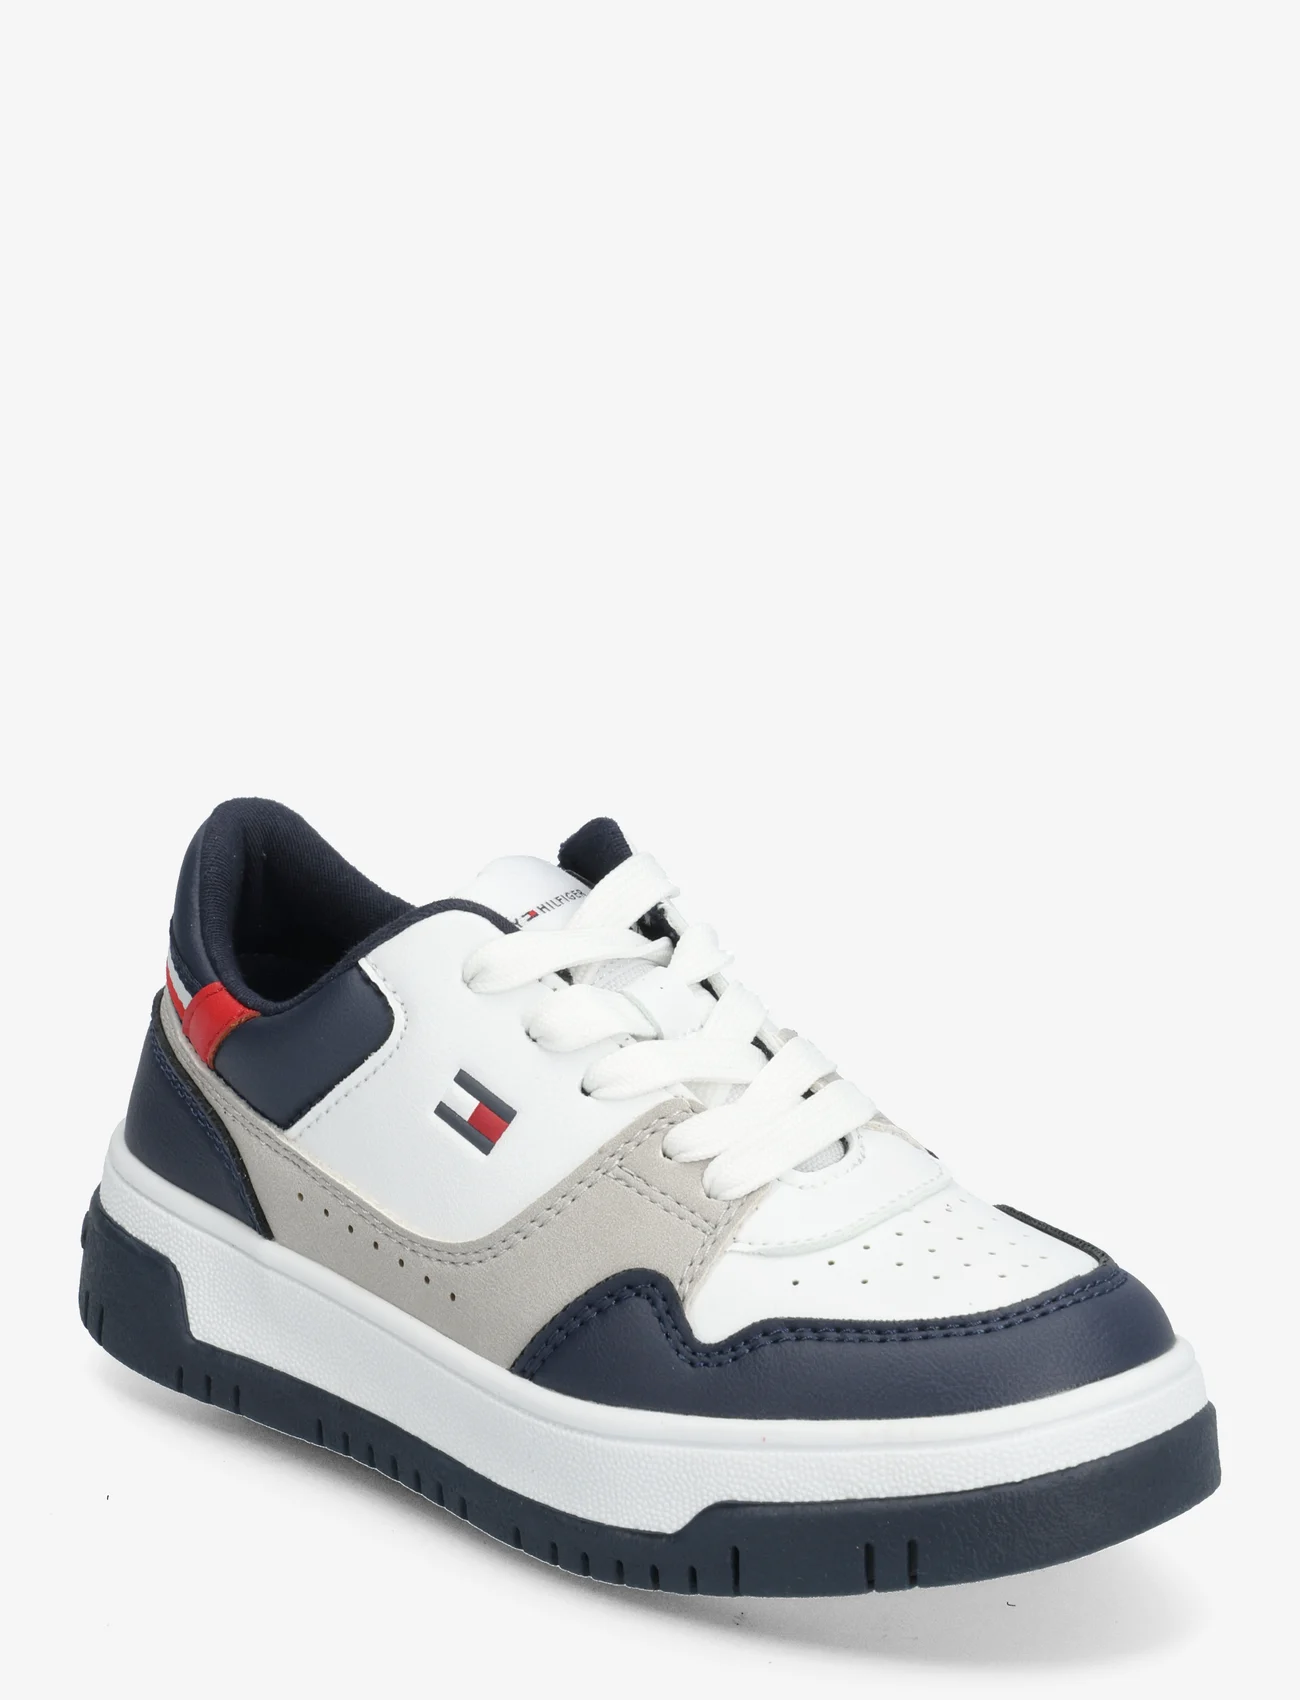 Tommy Hilfiger - LOW CUT LACE-UP SNEAKER - sommarfynd - white/blue/red - 0